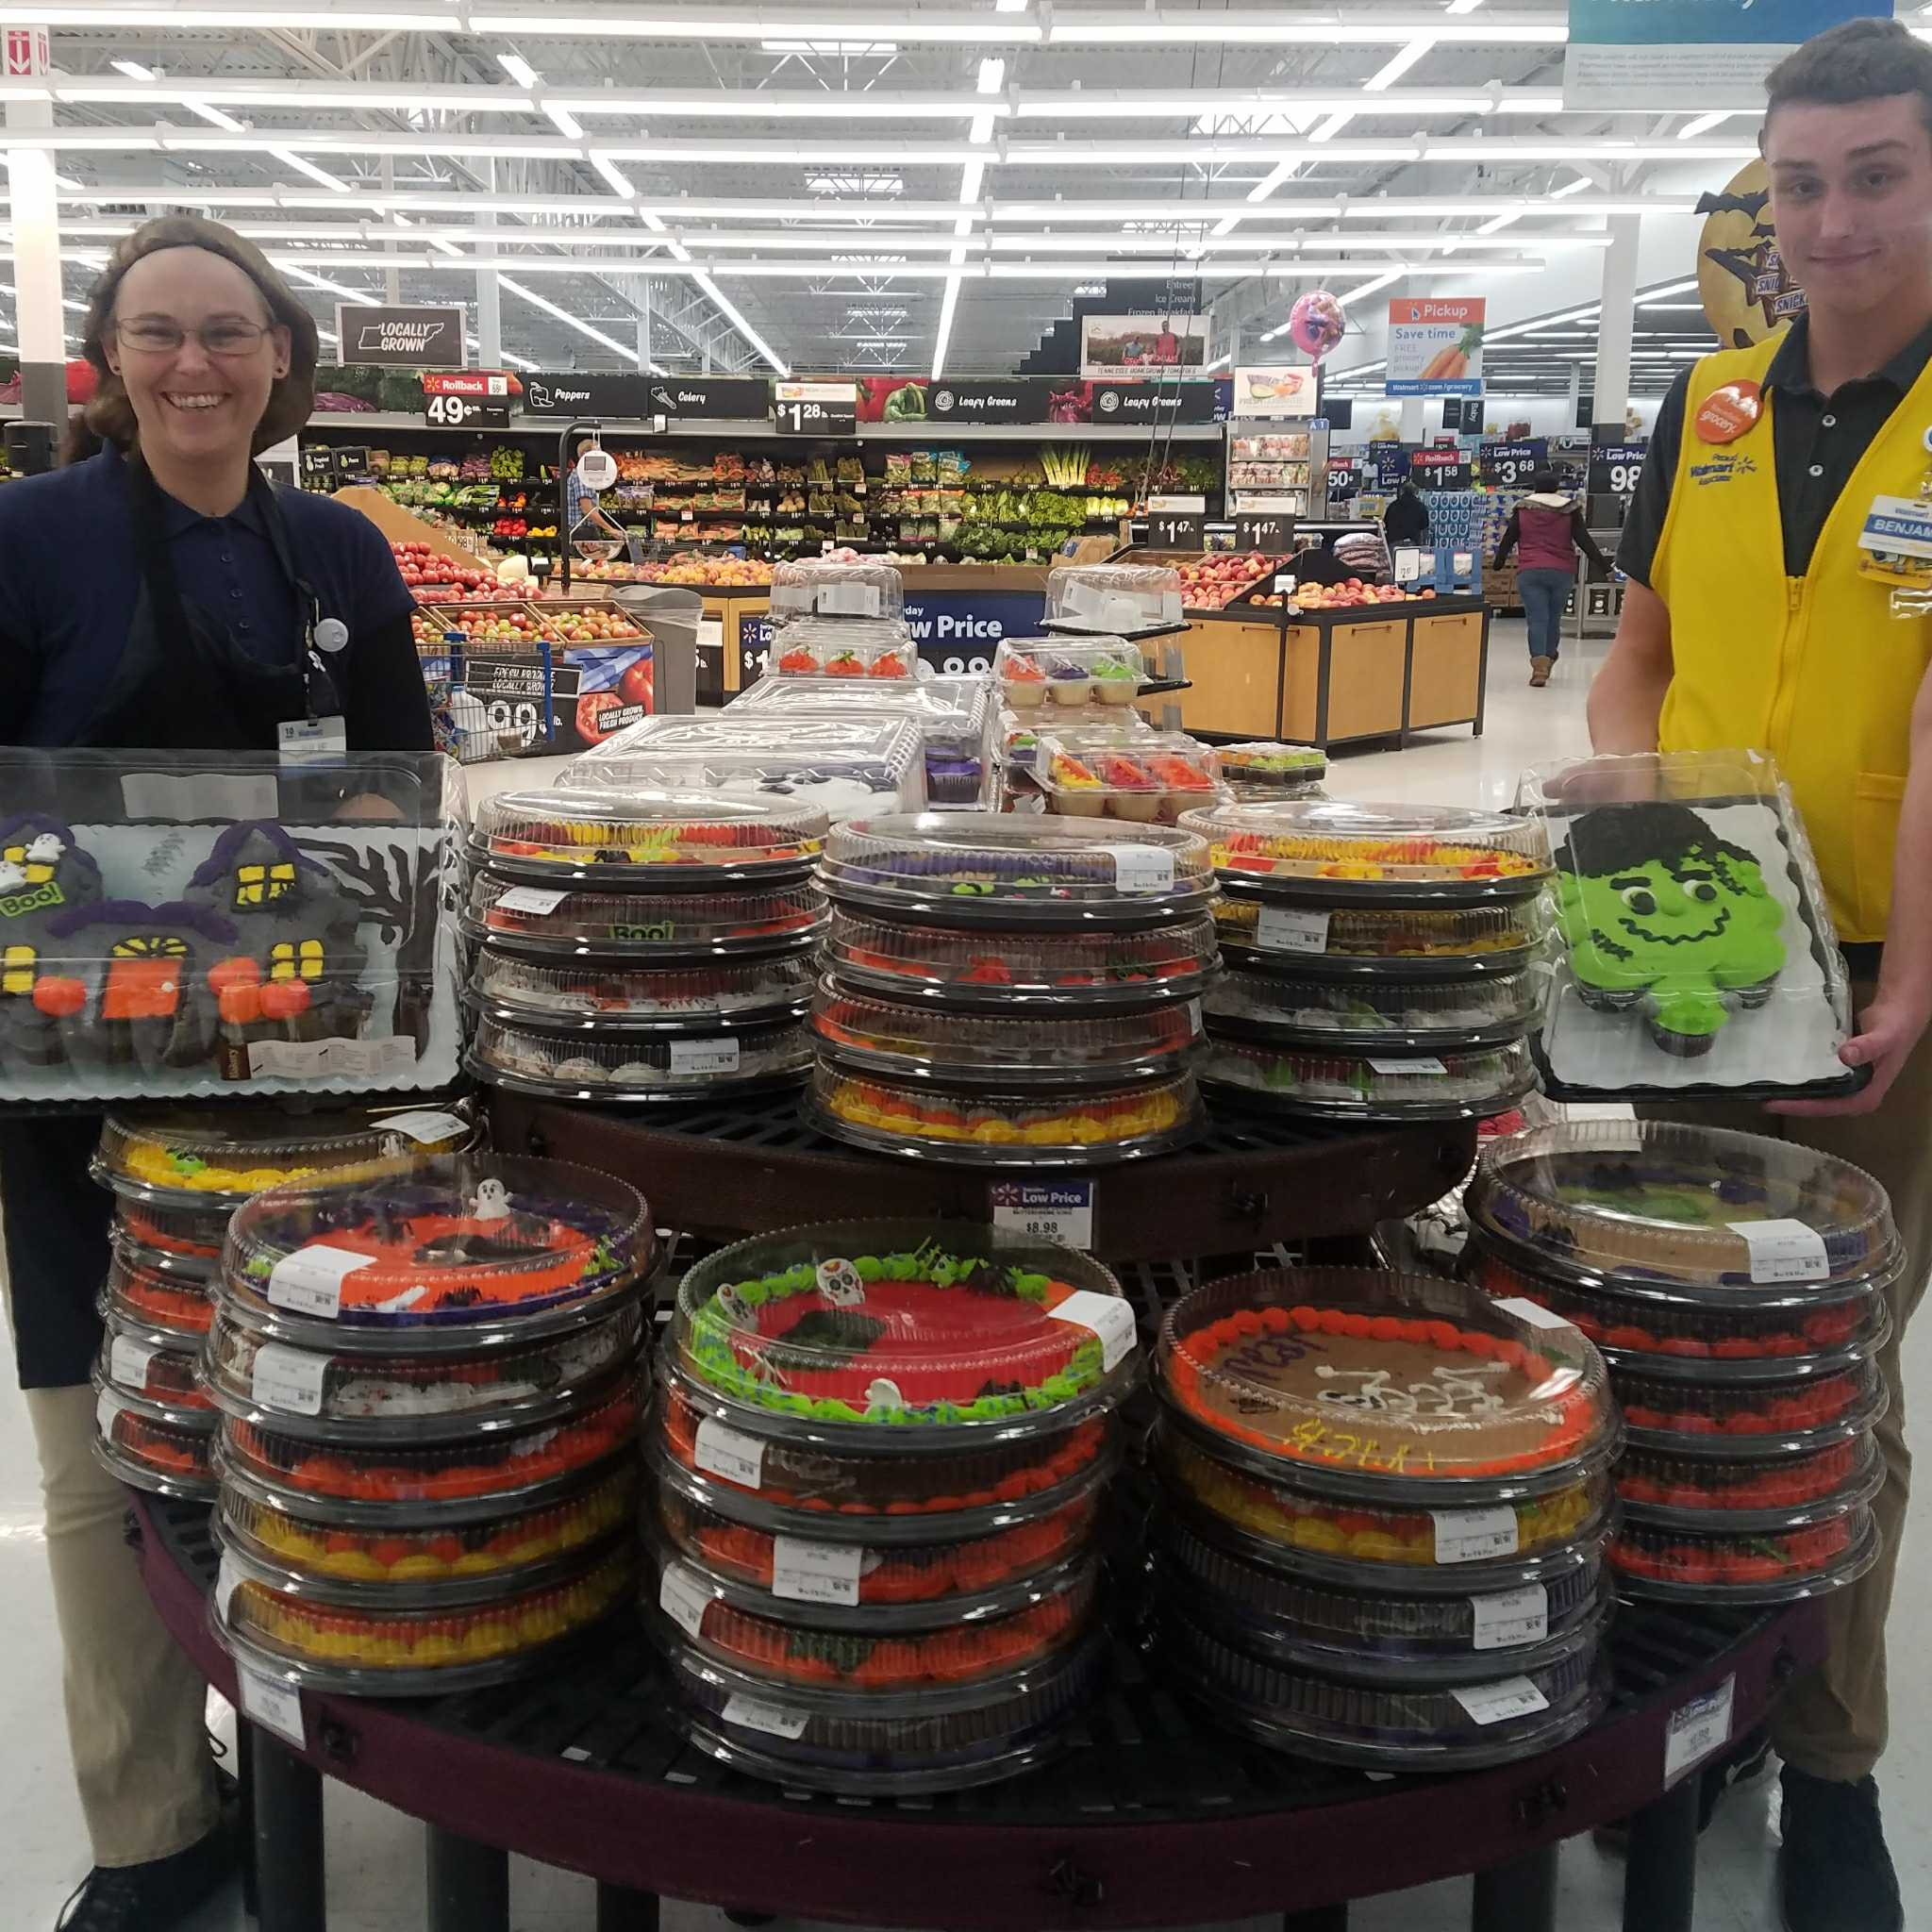 Halloween Cakes At Walmart
 Find out what is new at your Knoxville Walmart Supercenter